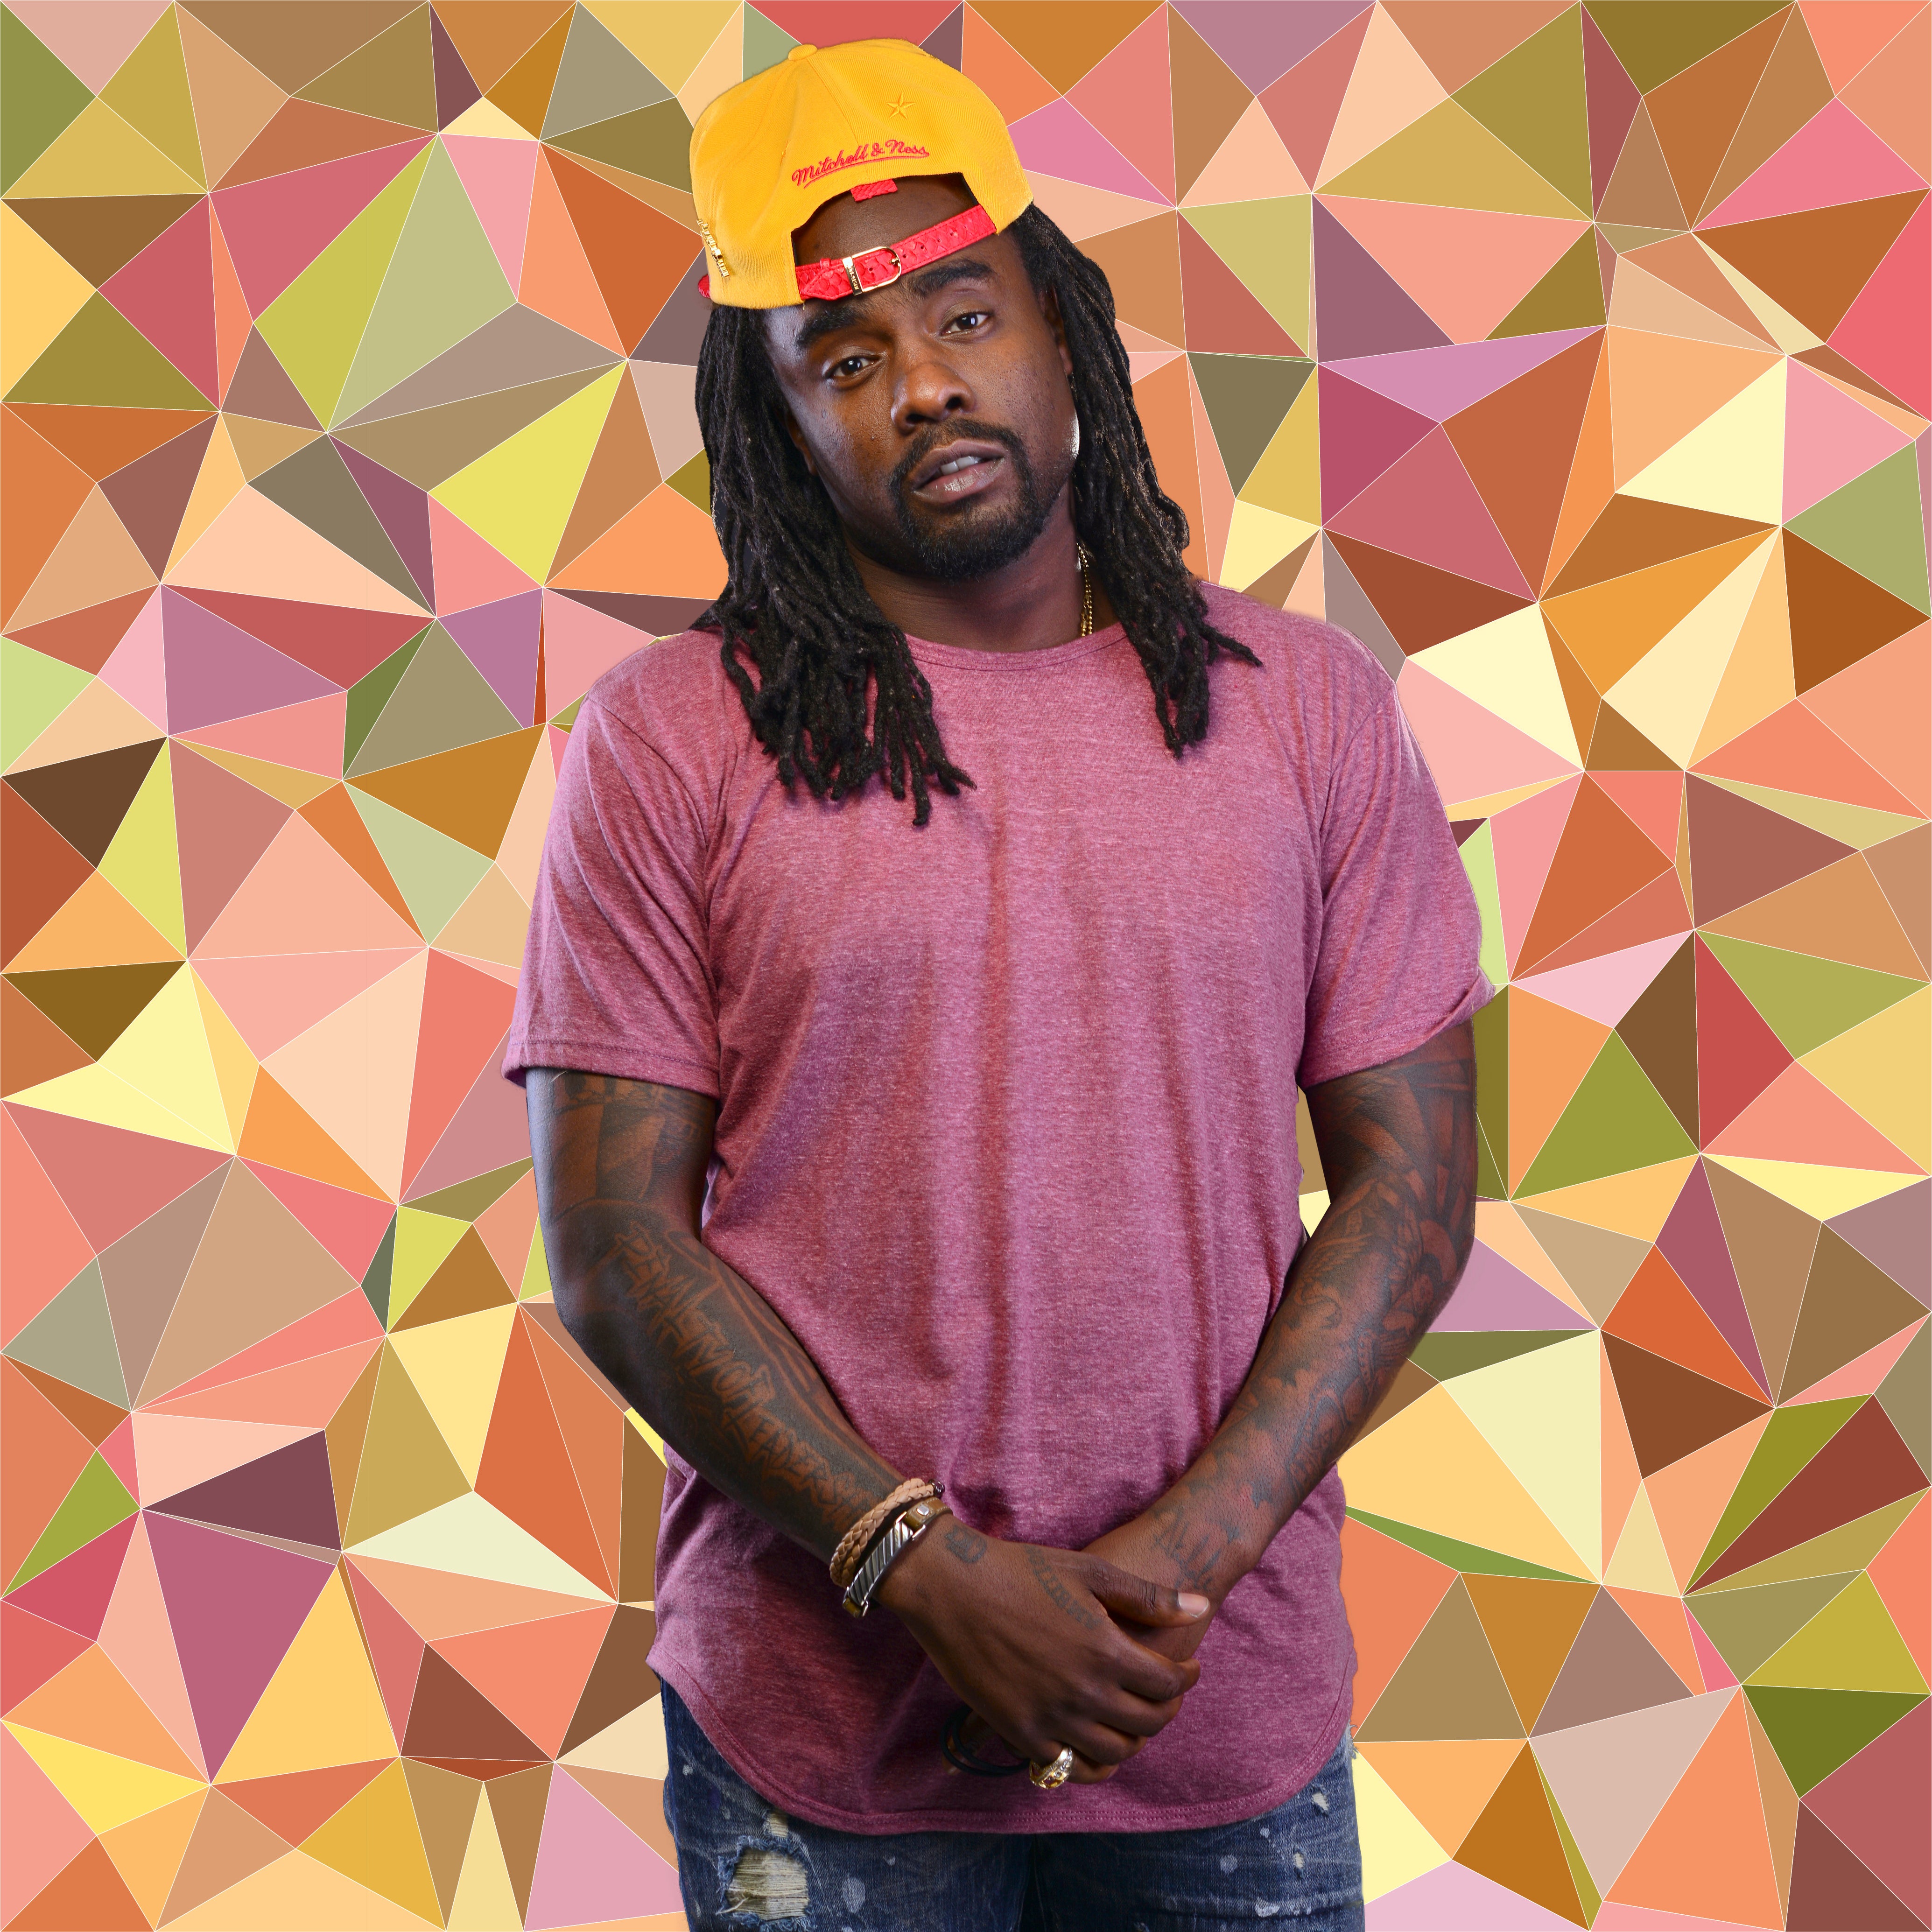 Wale Professes His Love For His Partner: 'I Love Her and I'm Never Gonna Stop'
